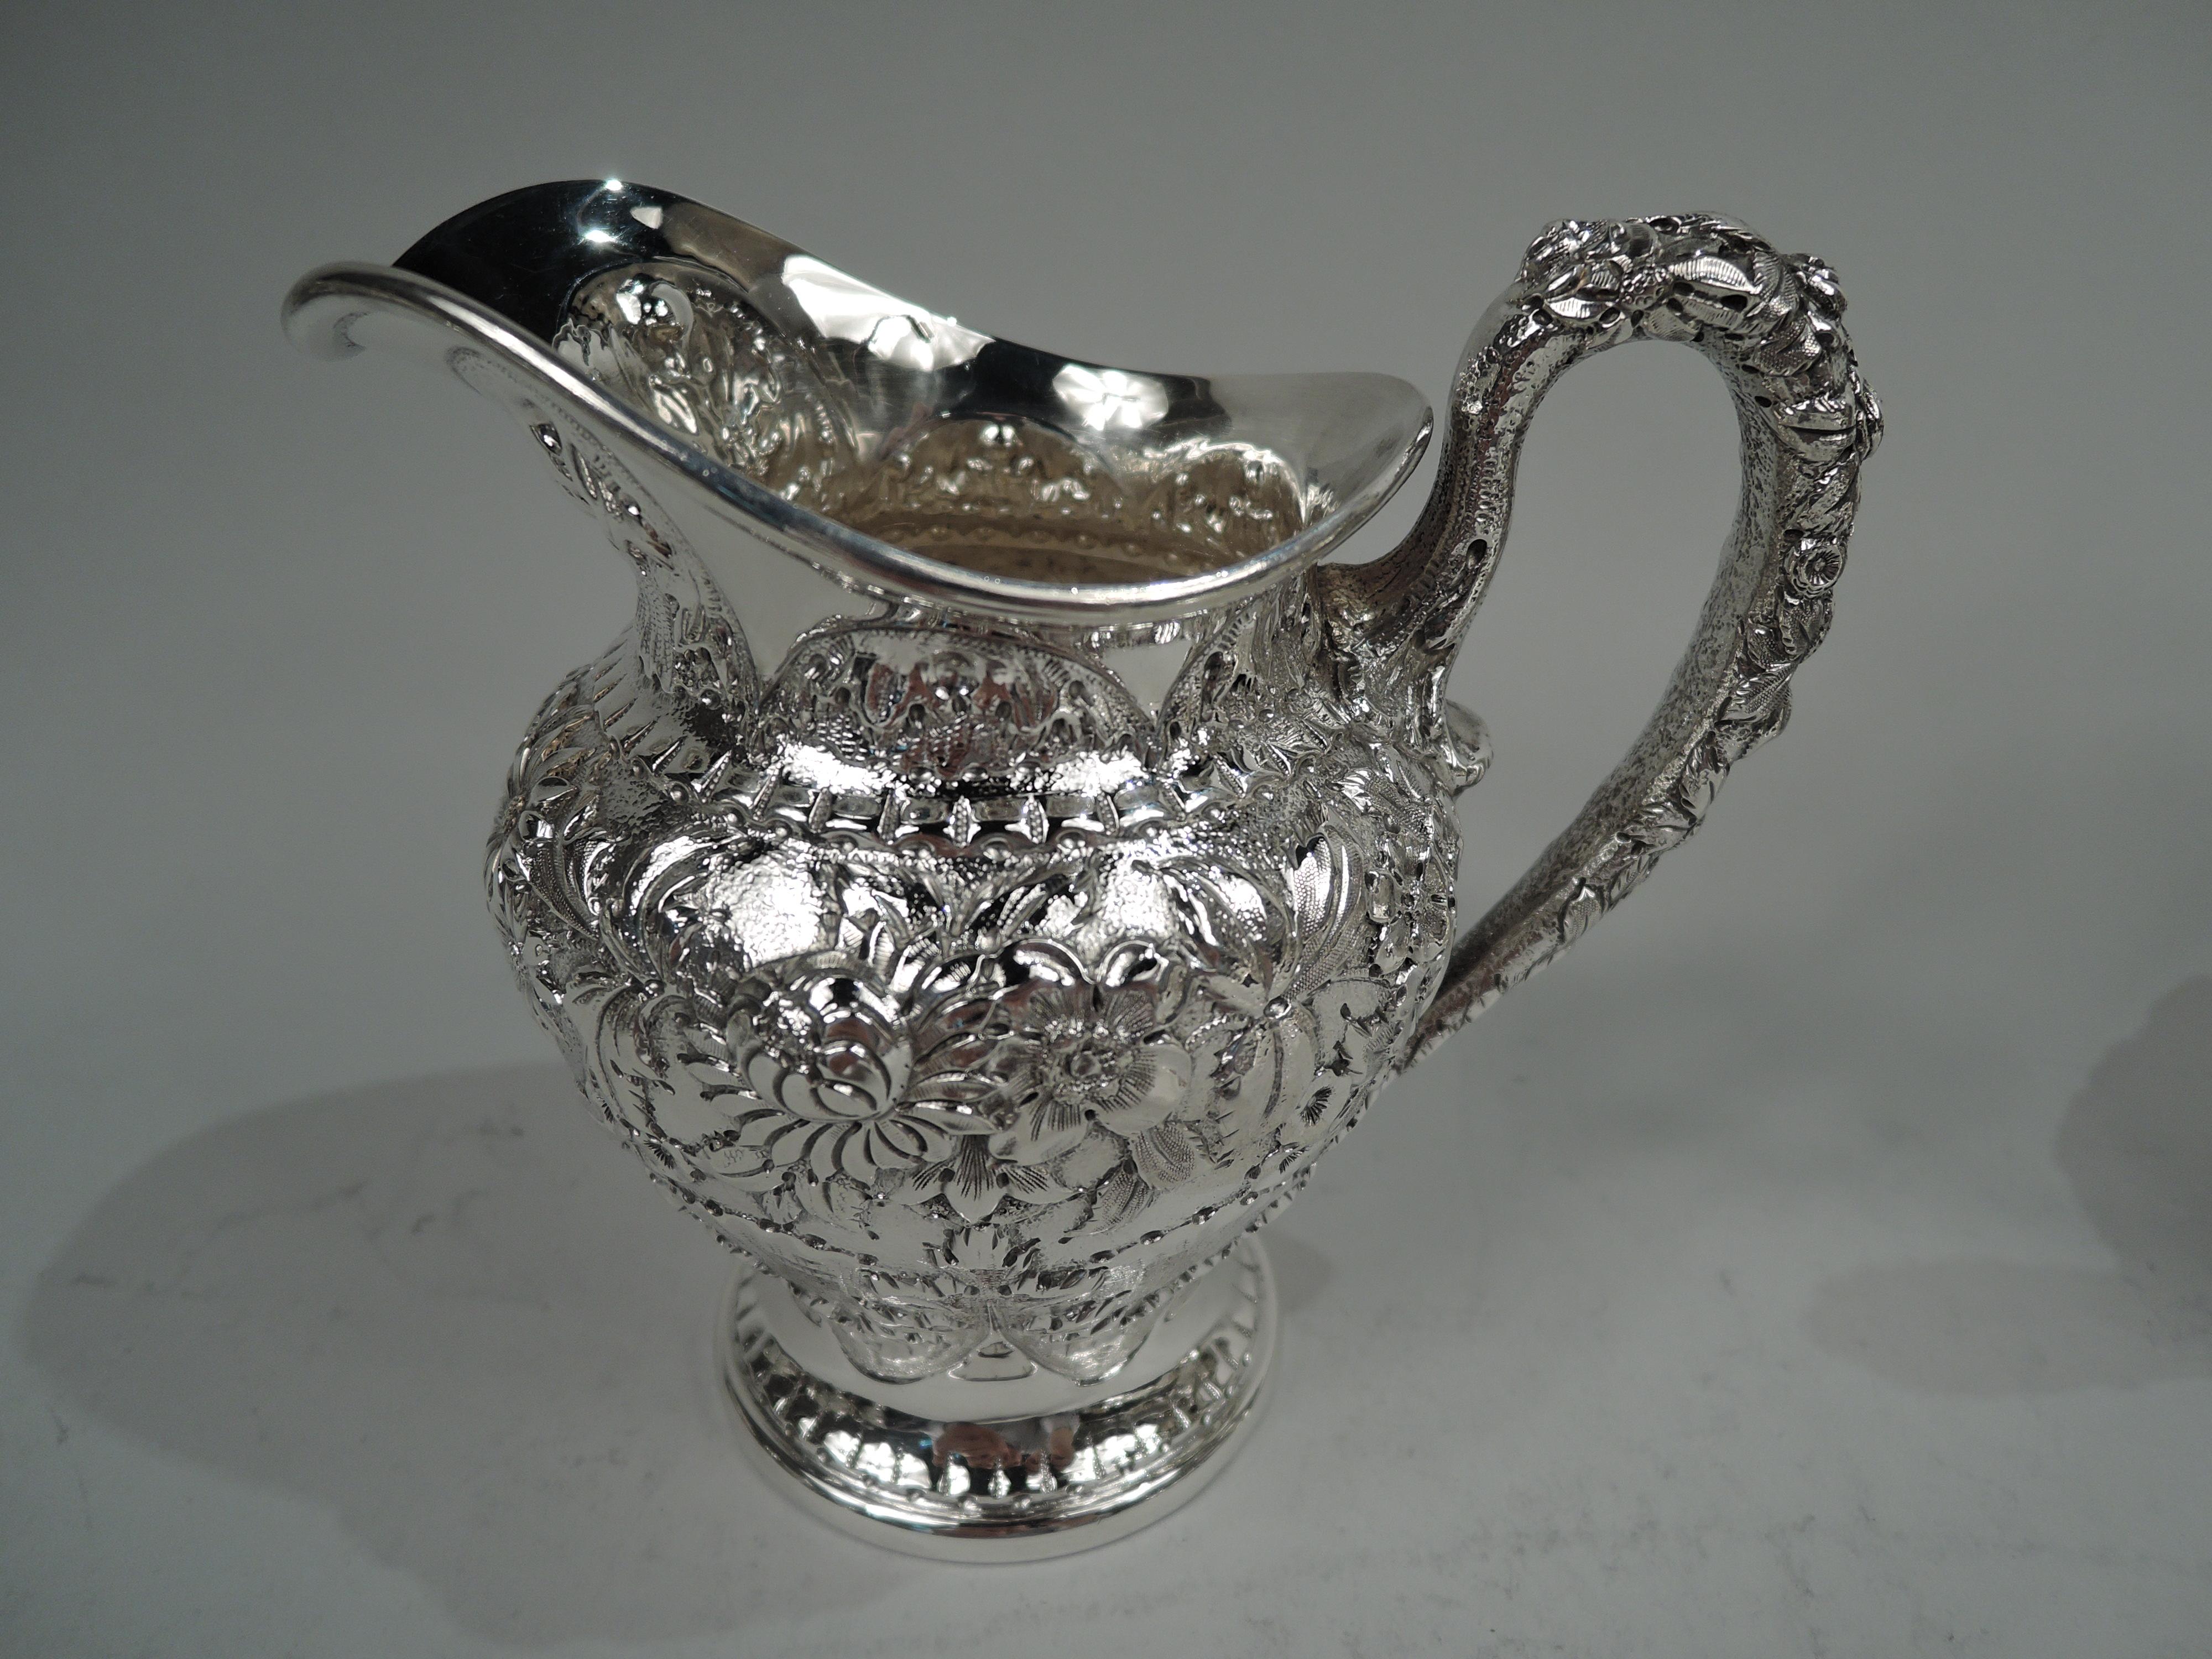 Pair of Edwardian sterling silver creamer and sugar. Made by S. Kirk & Son Inc. in Baltimore. Ovoid bodies and high looping handles. Creamer has helmet mouth and sugar has raised cover and finial. Frond and flower repousse; at bottom leaf and